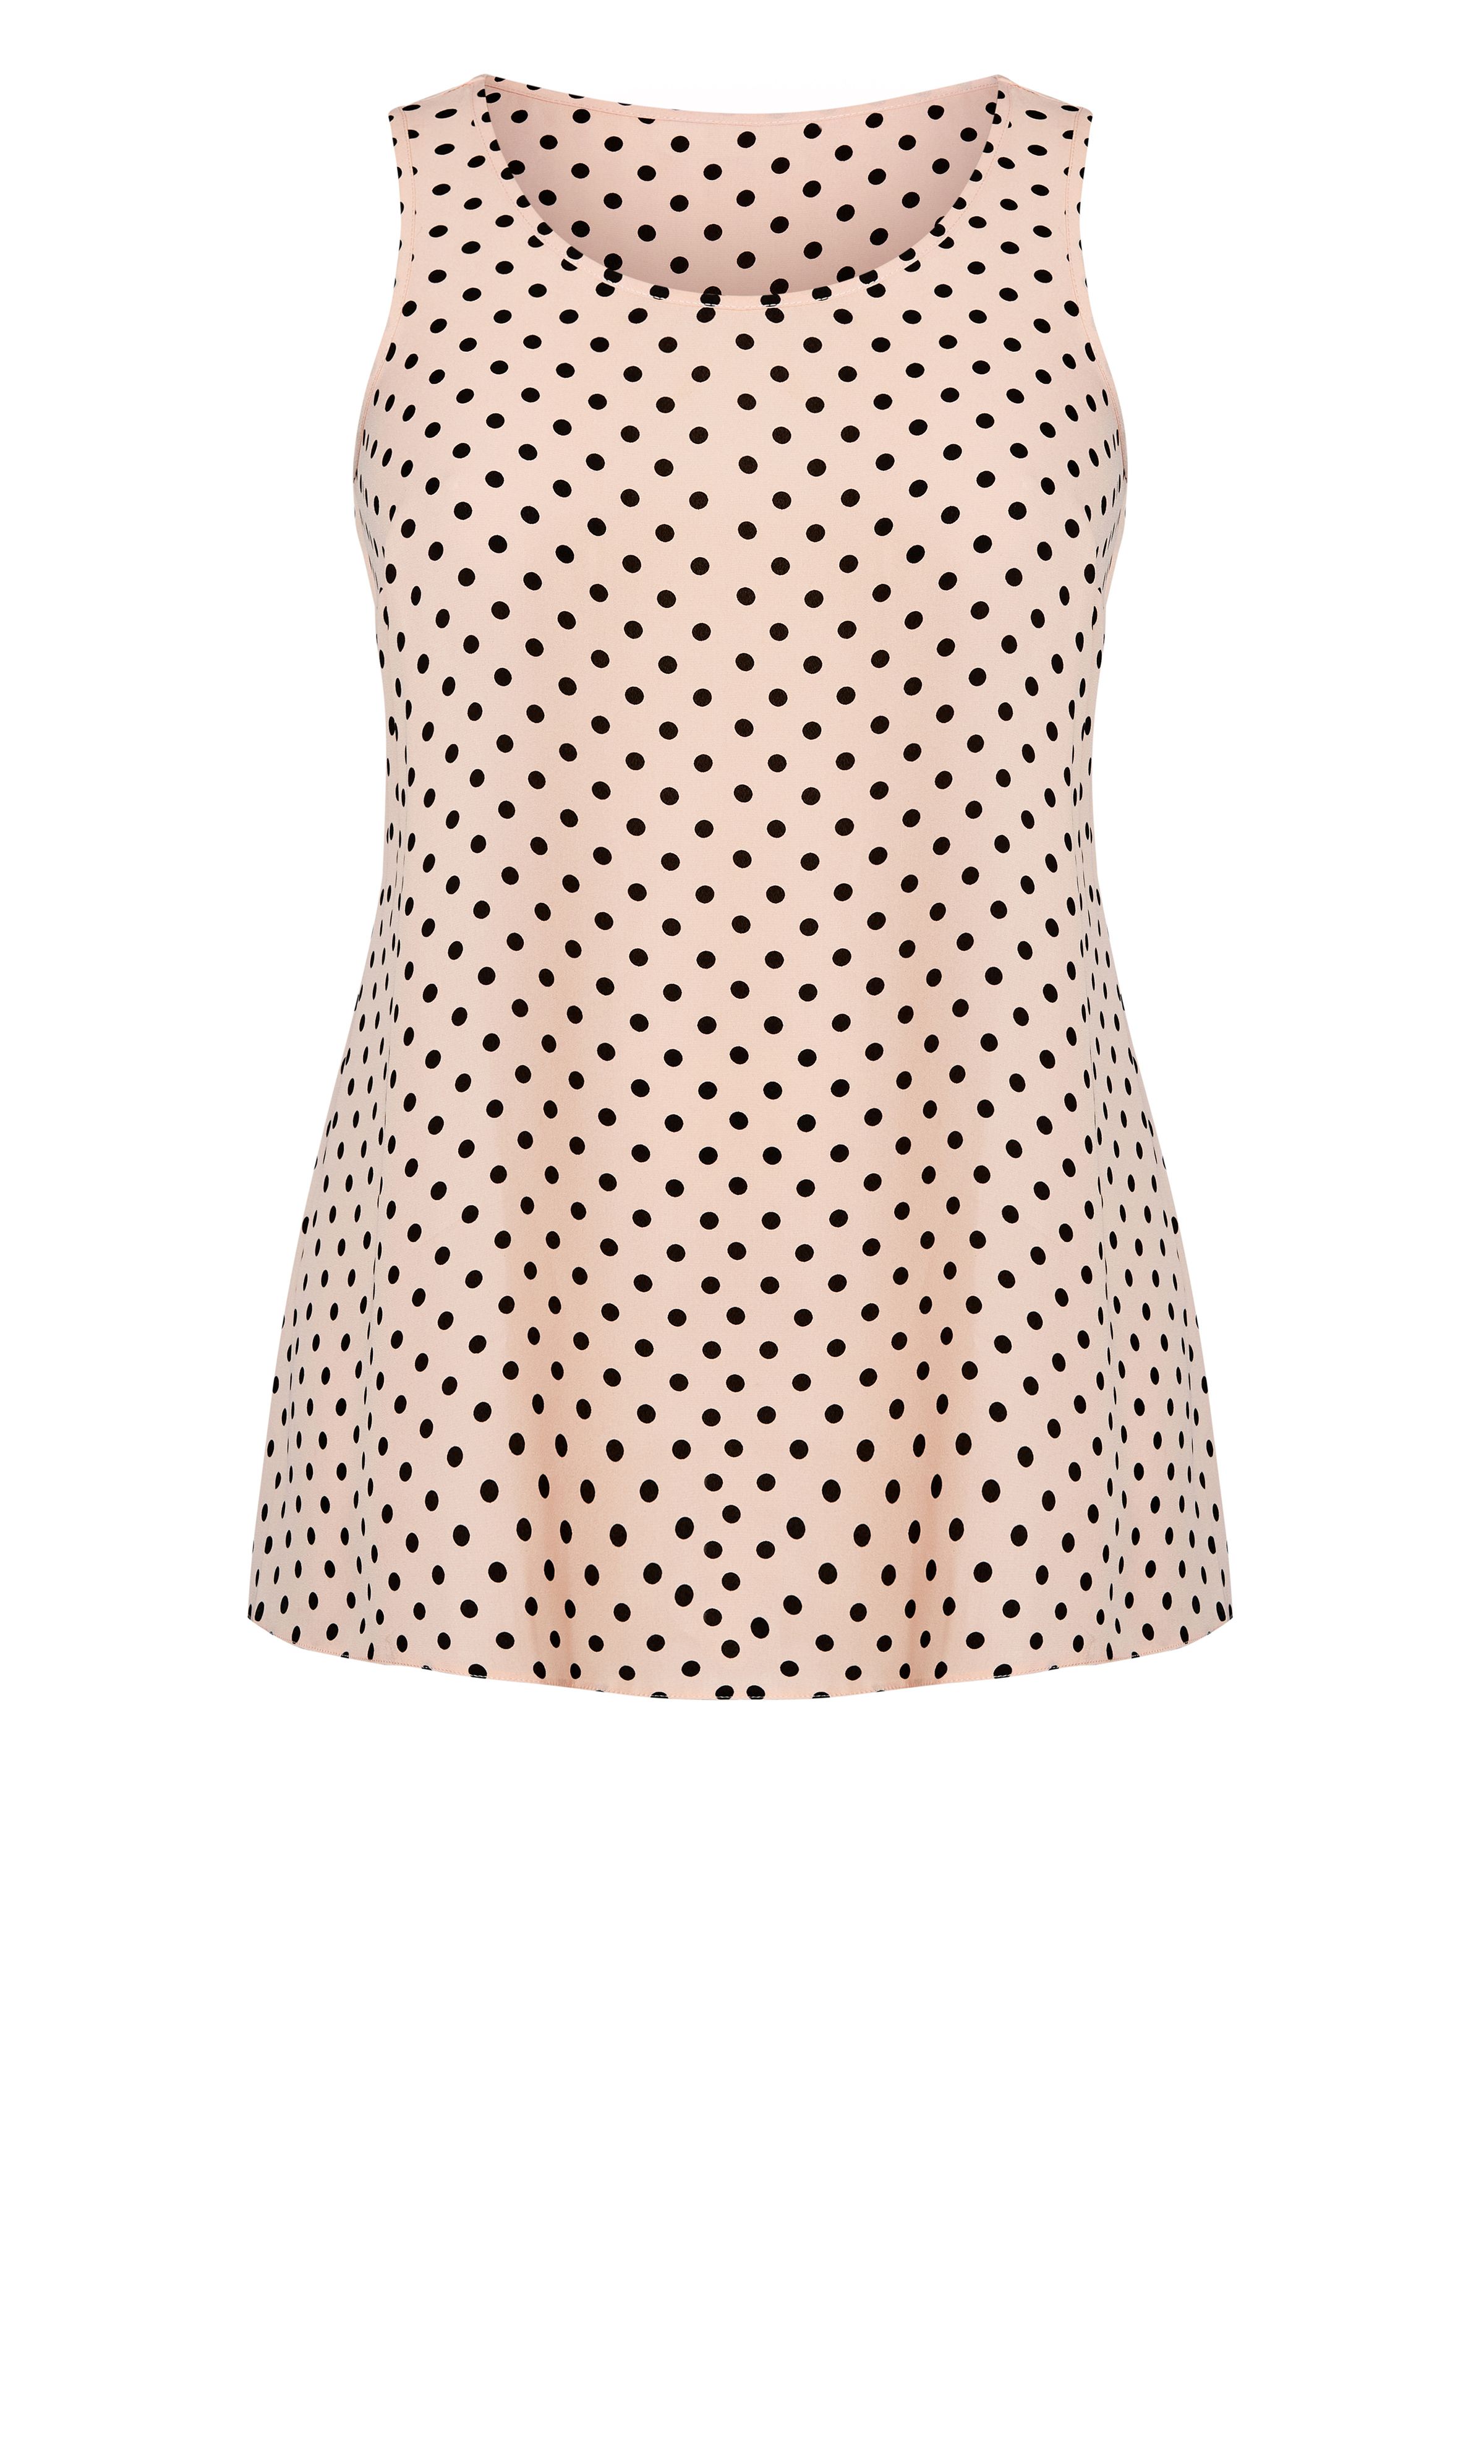 Super cute and effortless, the Spot Print Vest is a playful addition to your summer collection. With a blush pink hue and slightly flared silhouette, this top will drape over your curves effortlessly, keeping you breezy and stylish at the same time! Key Features Include: - Scoop neckline - Sleeveless - Lightweight non-stretch fabrication - Slightly flared silhouette - Unlined - Relaxed fit - Pull over style - Hip length Wear with frayed mini shorts, wedges and a pair of gold hoops for upstyled Saturday styling!